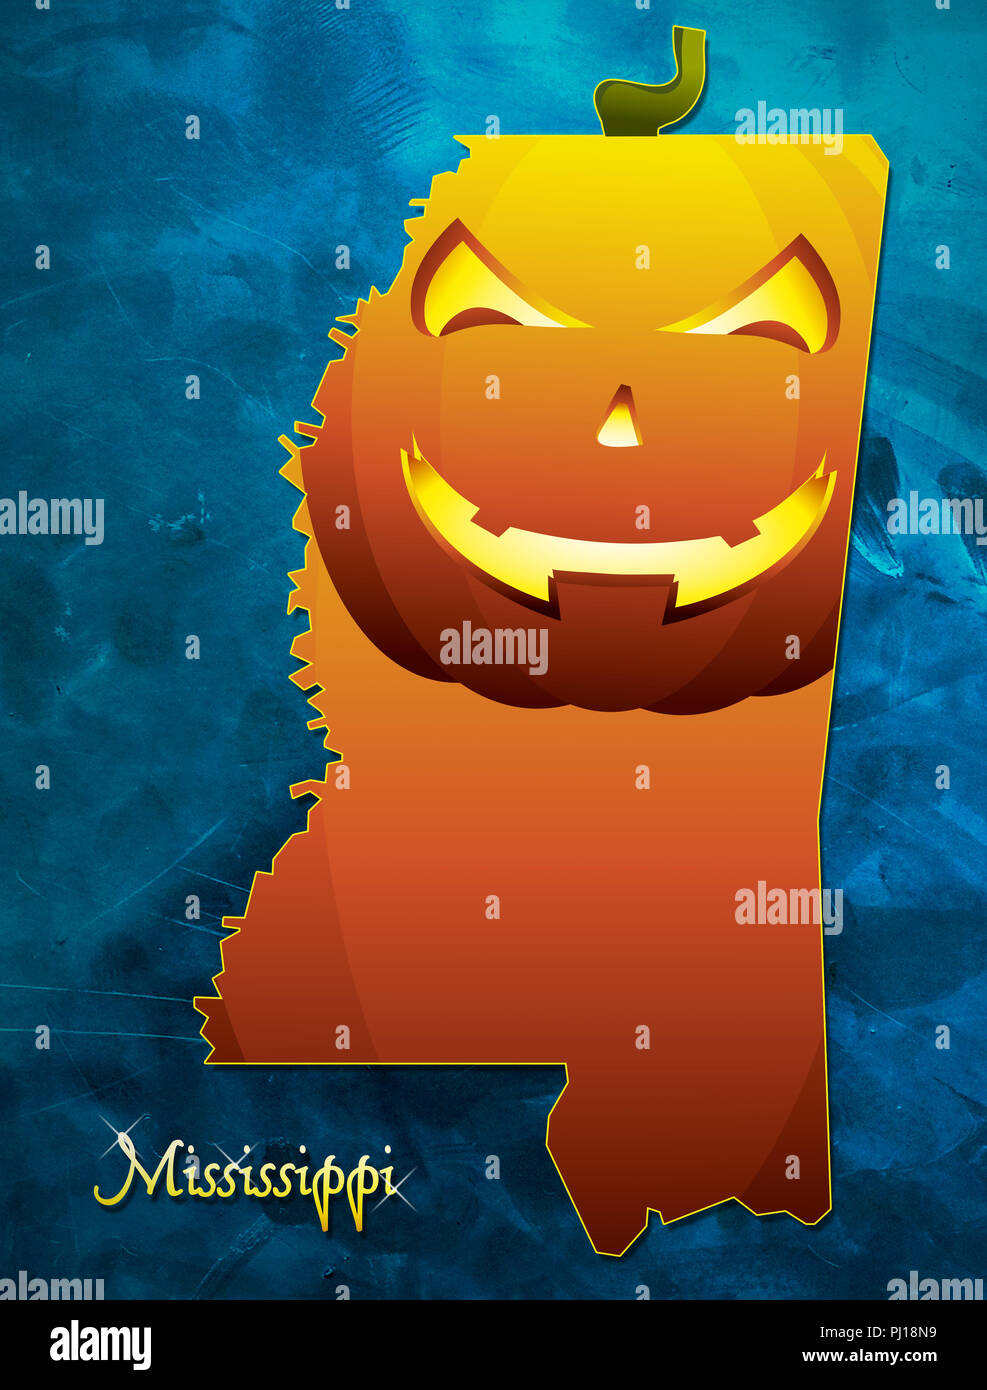 Mississippi state map USA with halloween pumpkin face illustration Stock Photo